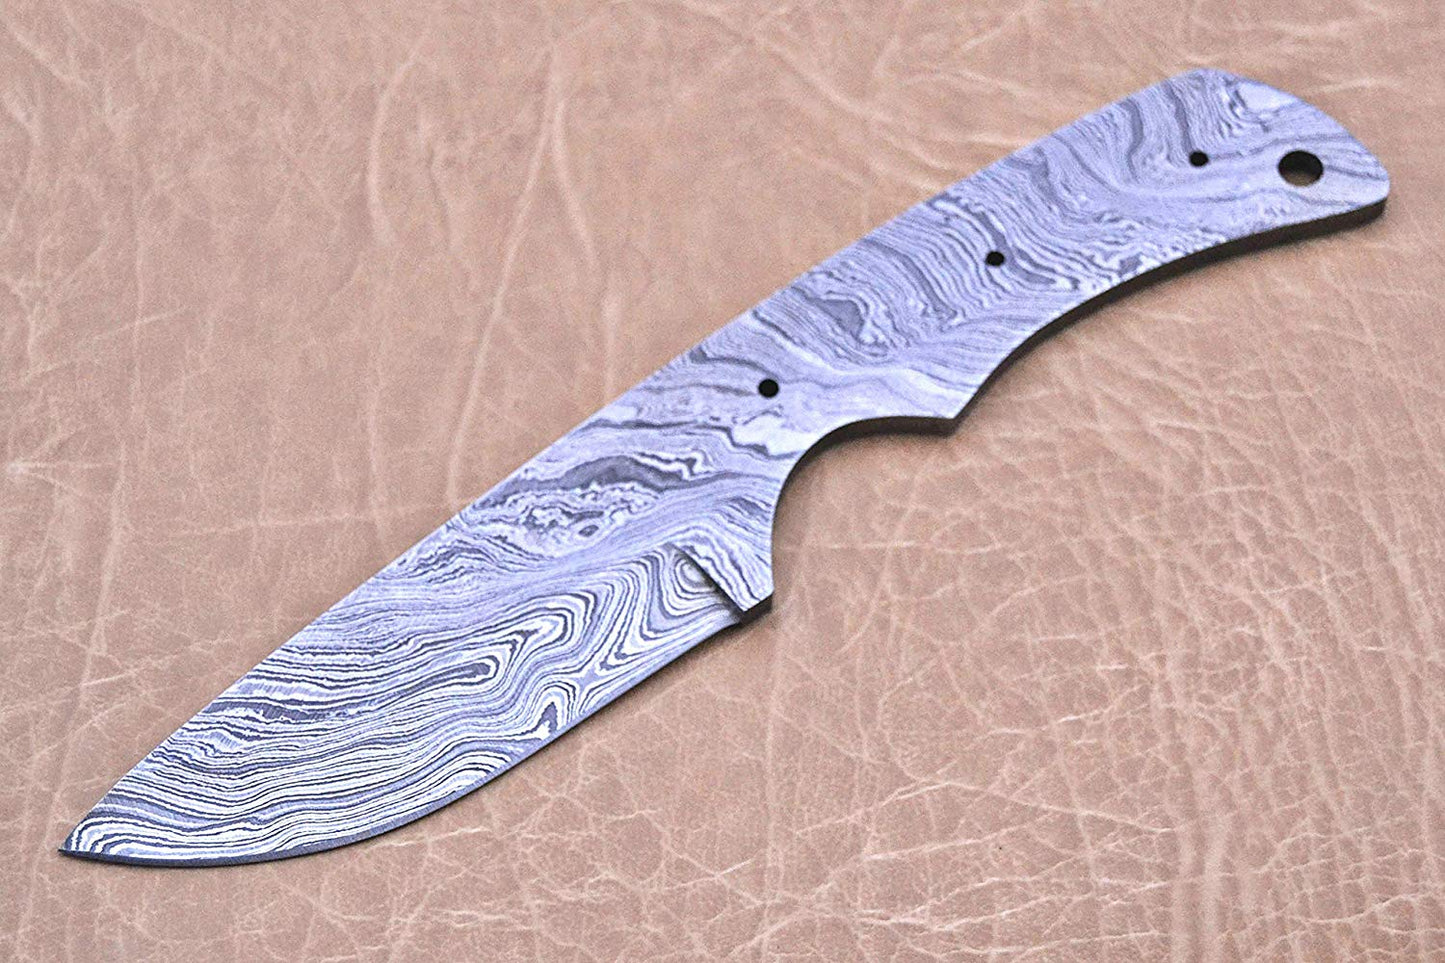 8 inches Long Blank Blade, Knife Making Supplies, Damascus Steel Blank Blade Hand Forged Skinning Knife with 3 Pins & an Inserting Hole Space 4" Long Blade with 4" Scale